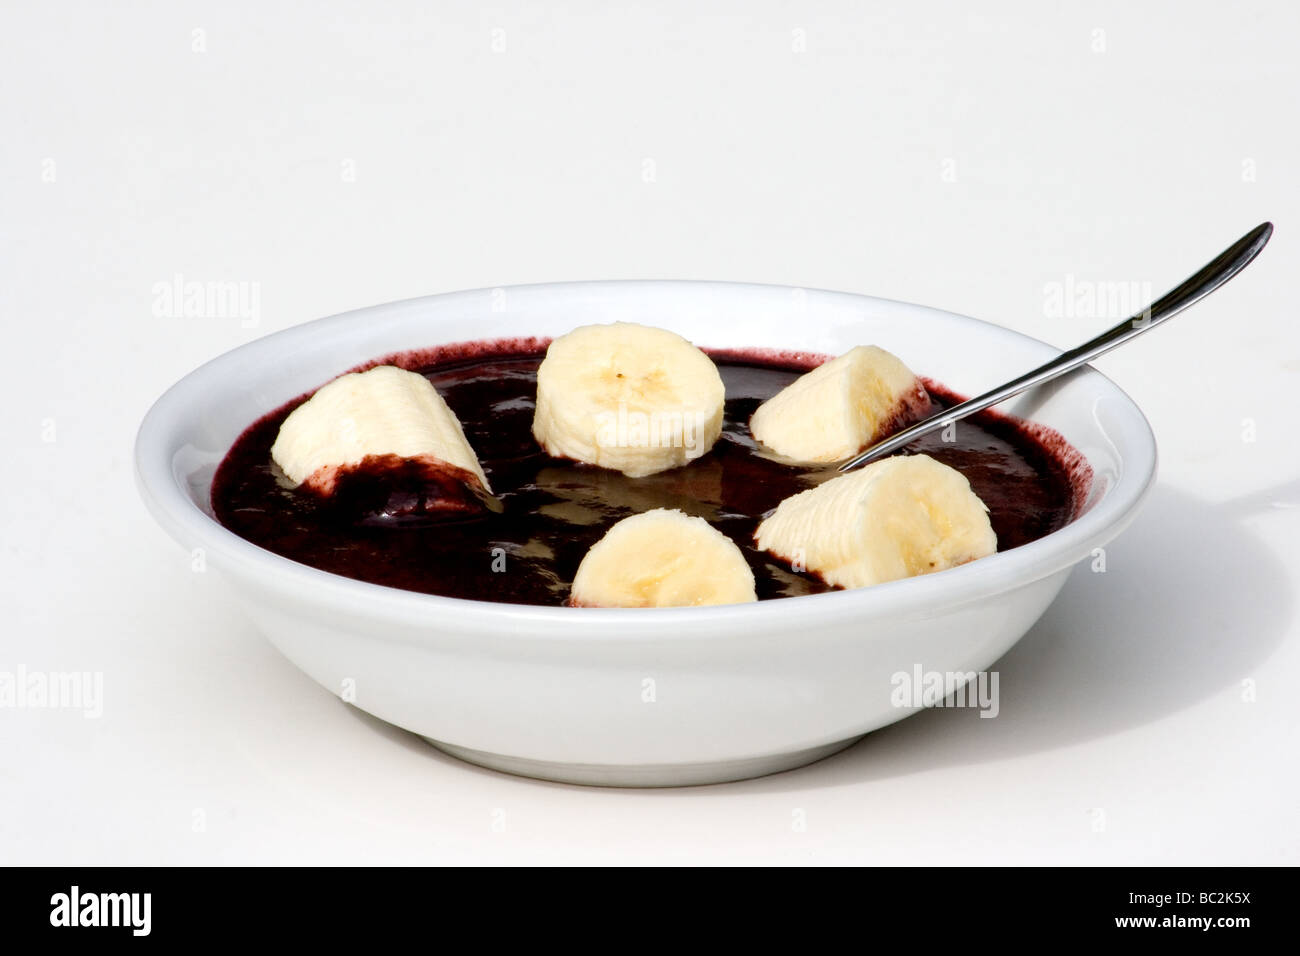 Close-uo of açai pulp served in a bowl with sliced banana Stock Photo